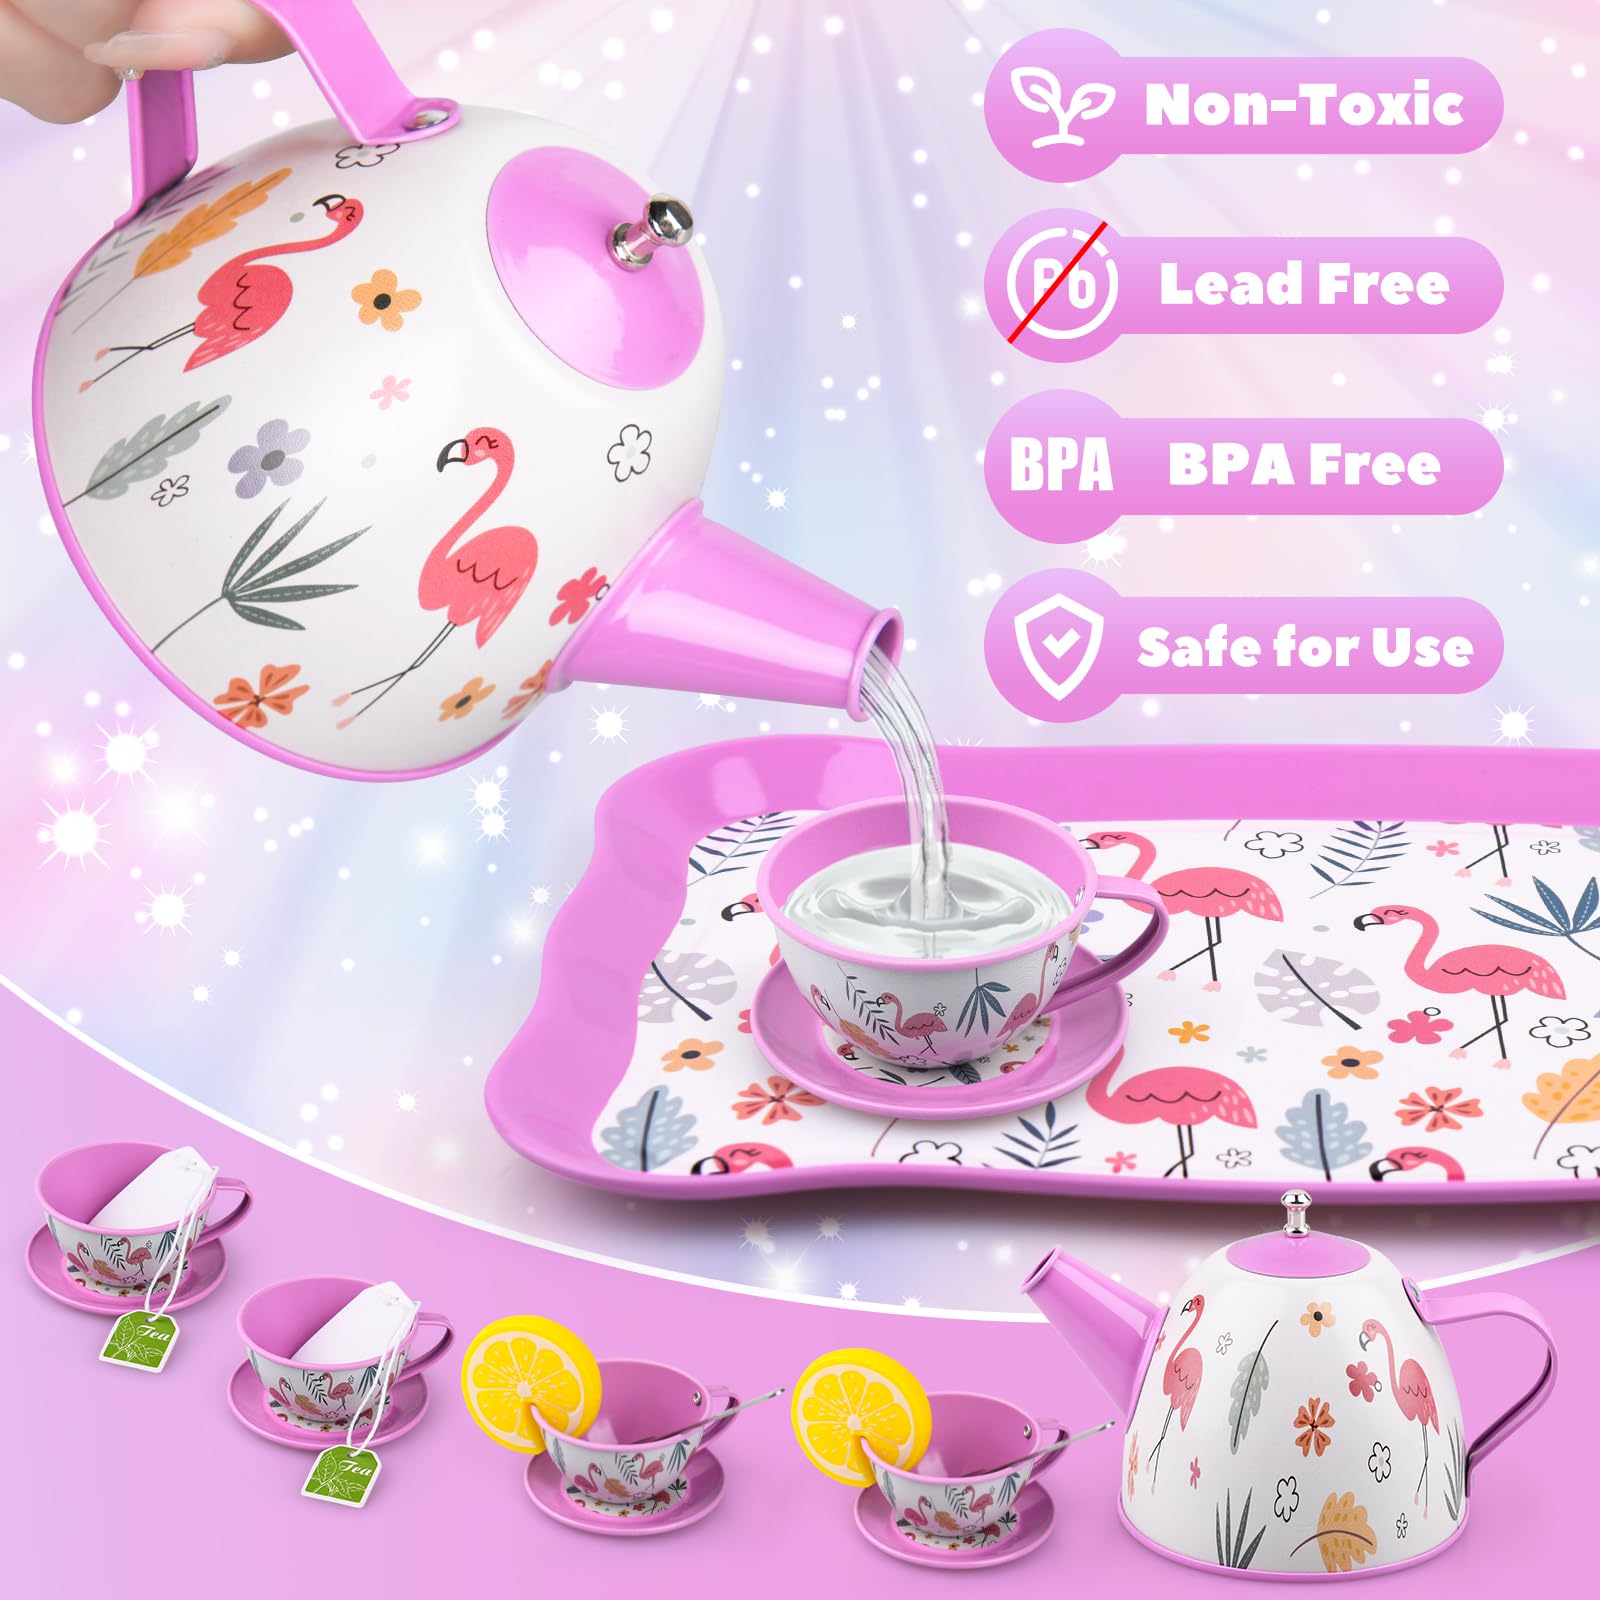 41Pcs Tea Party Set for Little Girls, Pretend Tin Teapot Set, Princess Tea Time Play Kitchen Toy with Dessert, Doughnut, Carrying Birthday Gift Case for Toddlers Age 3 4 5 6